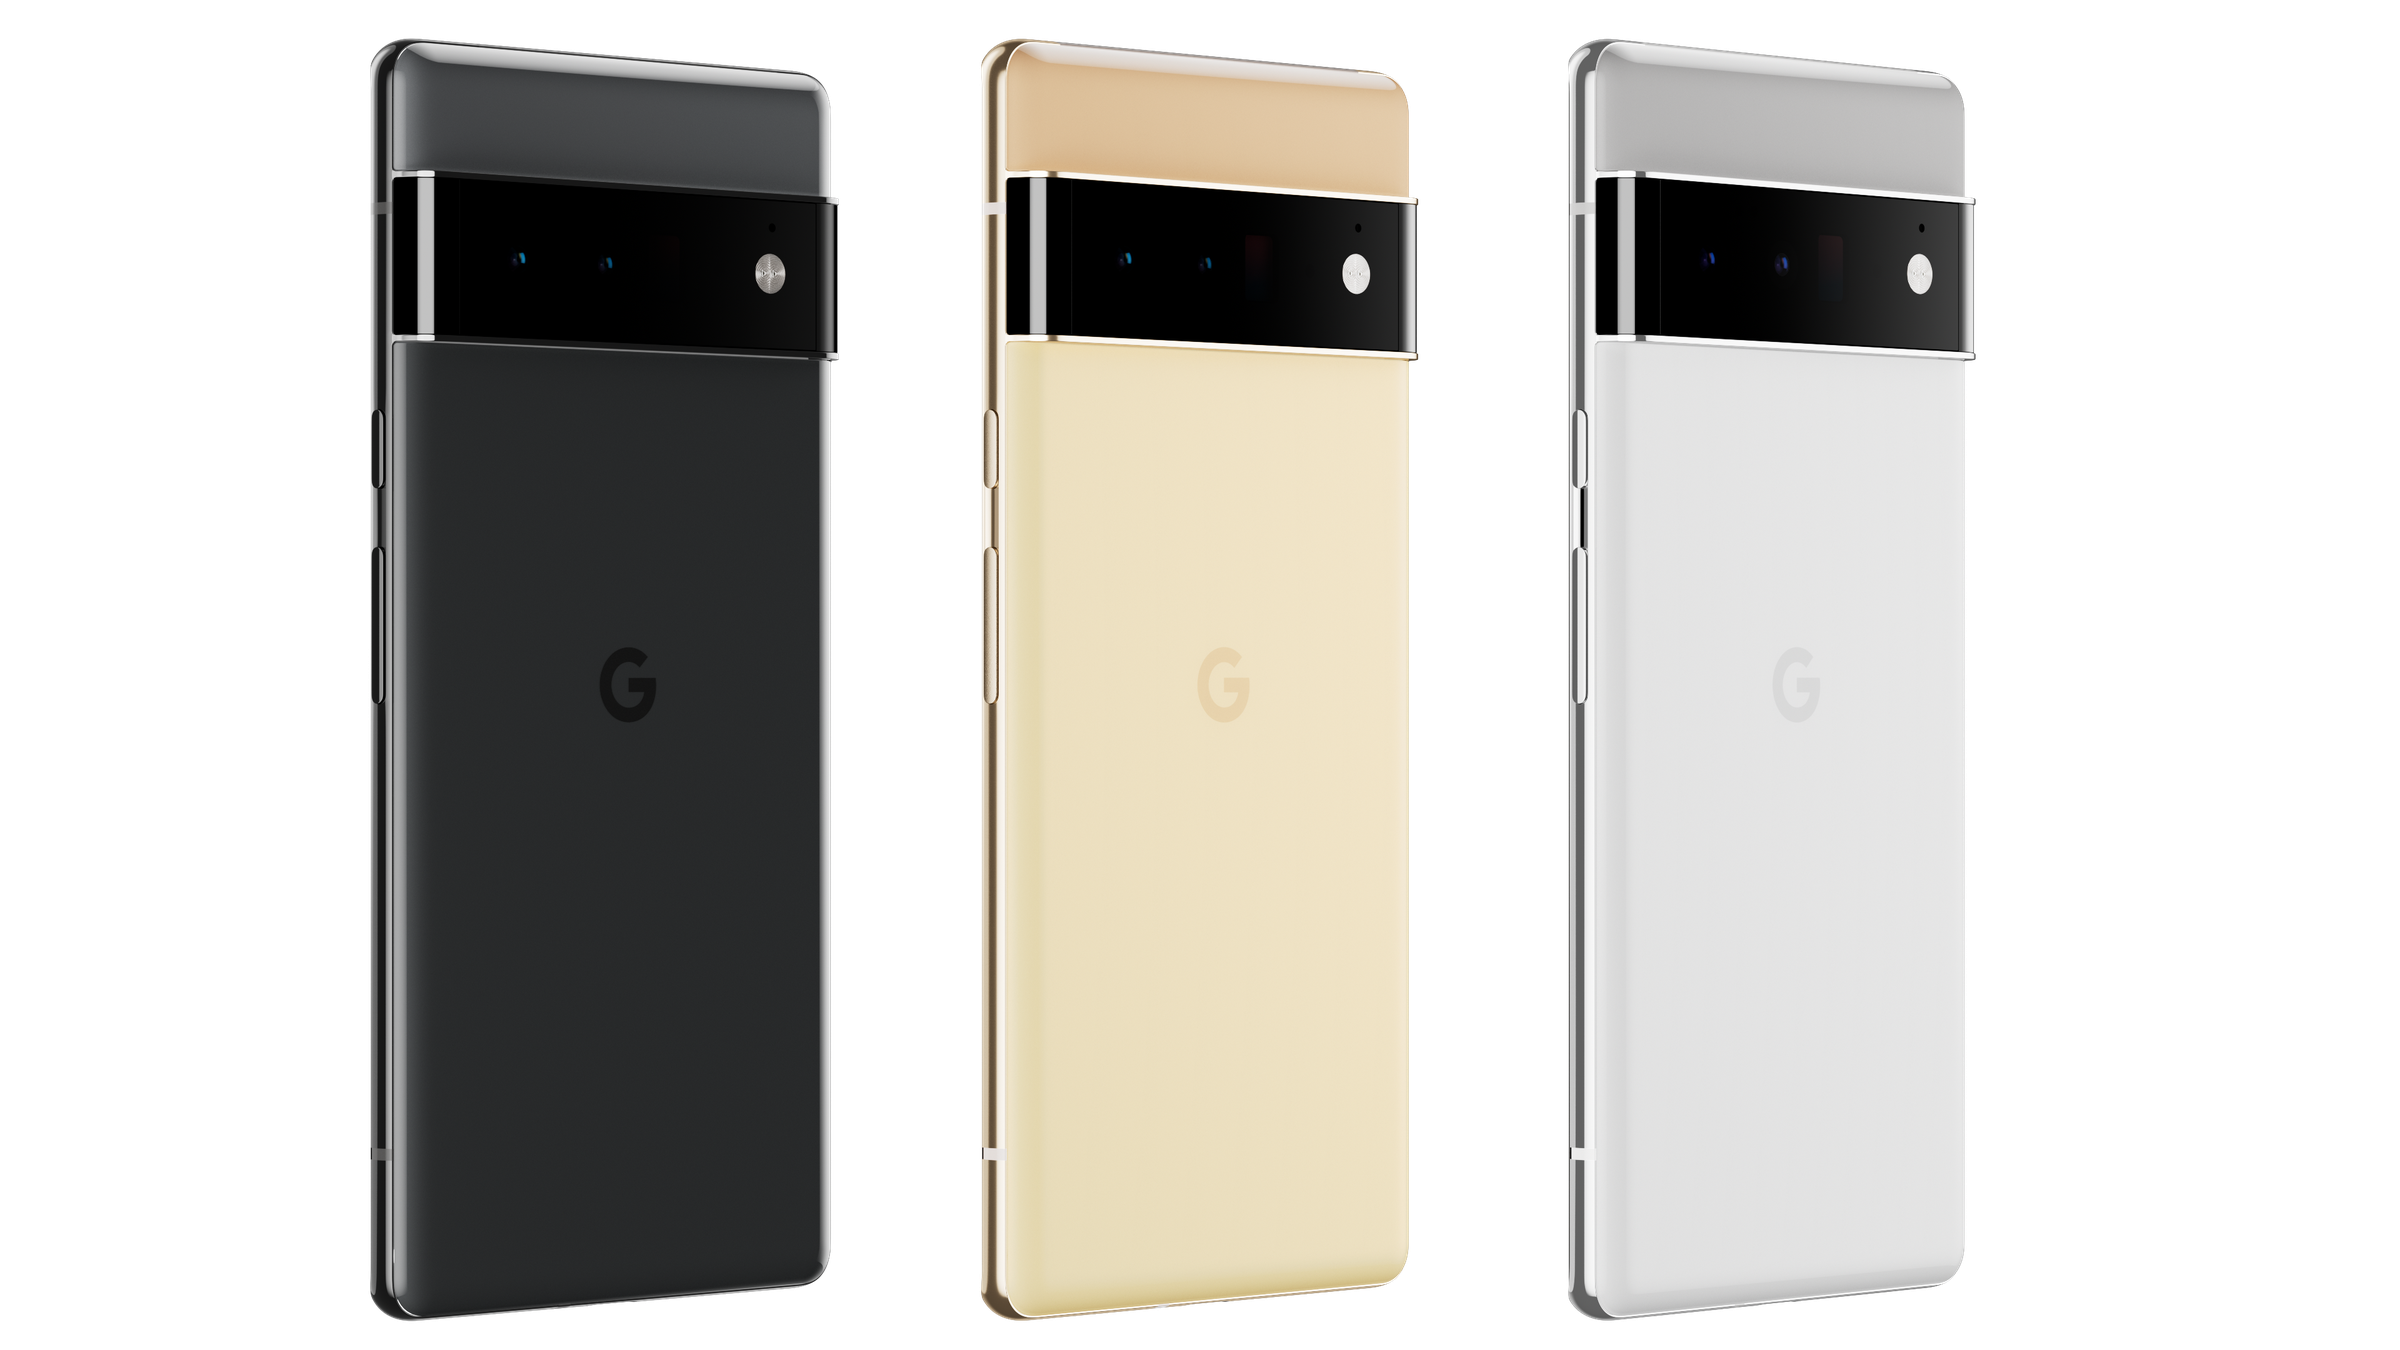 The Pixel 6 Pro comes in three staid color options.